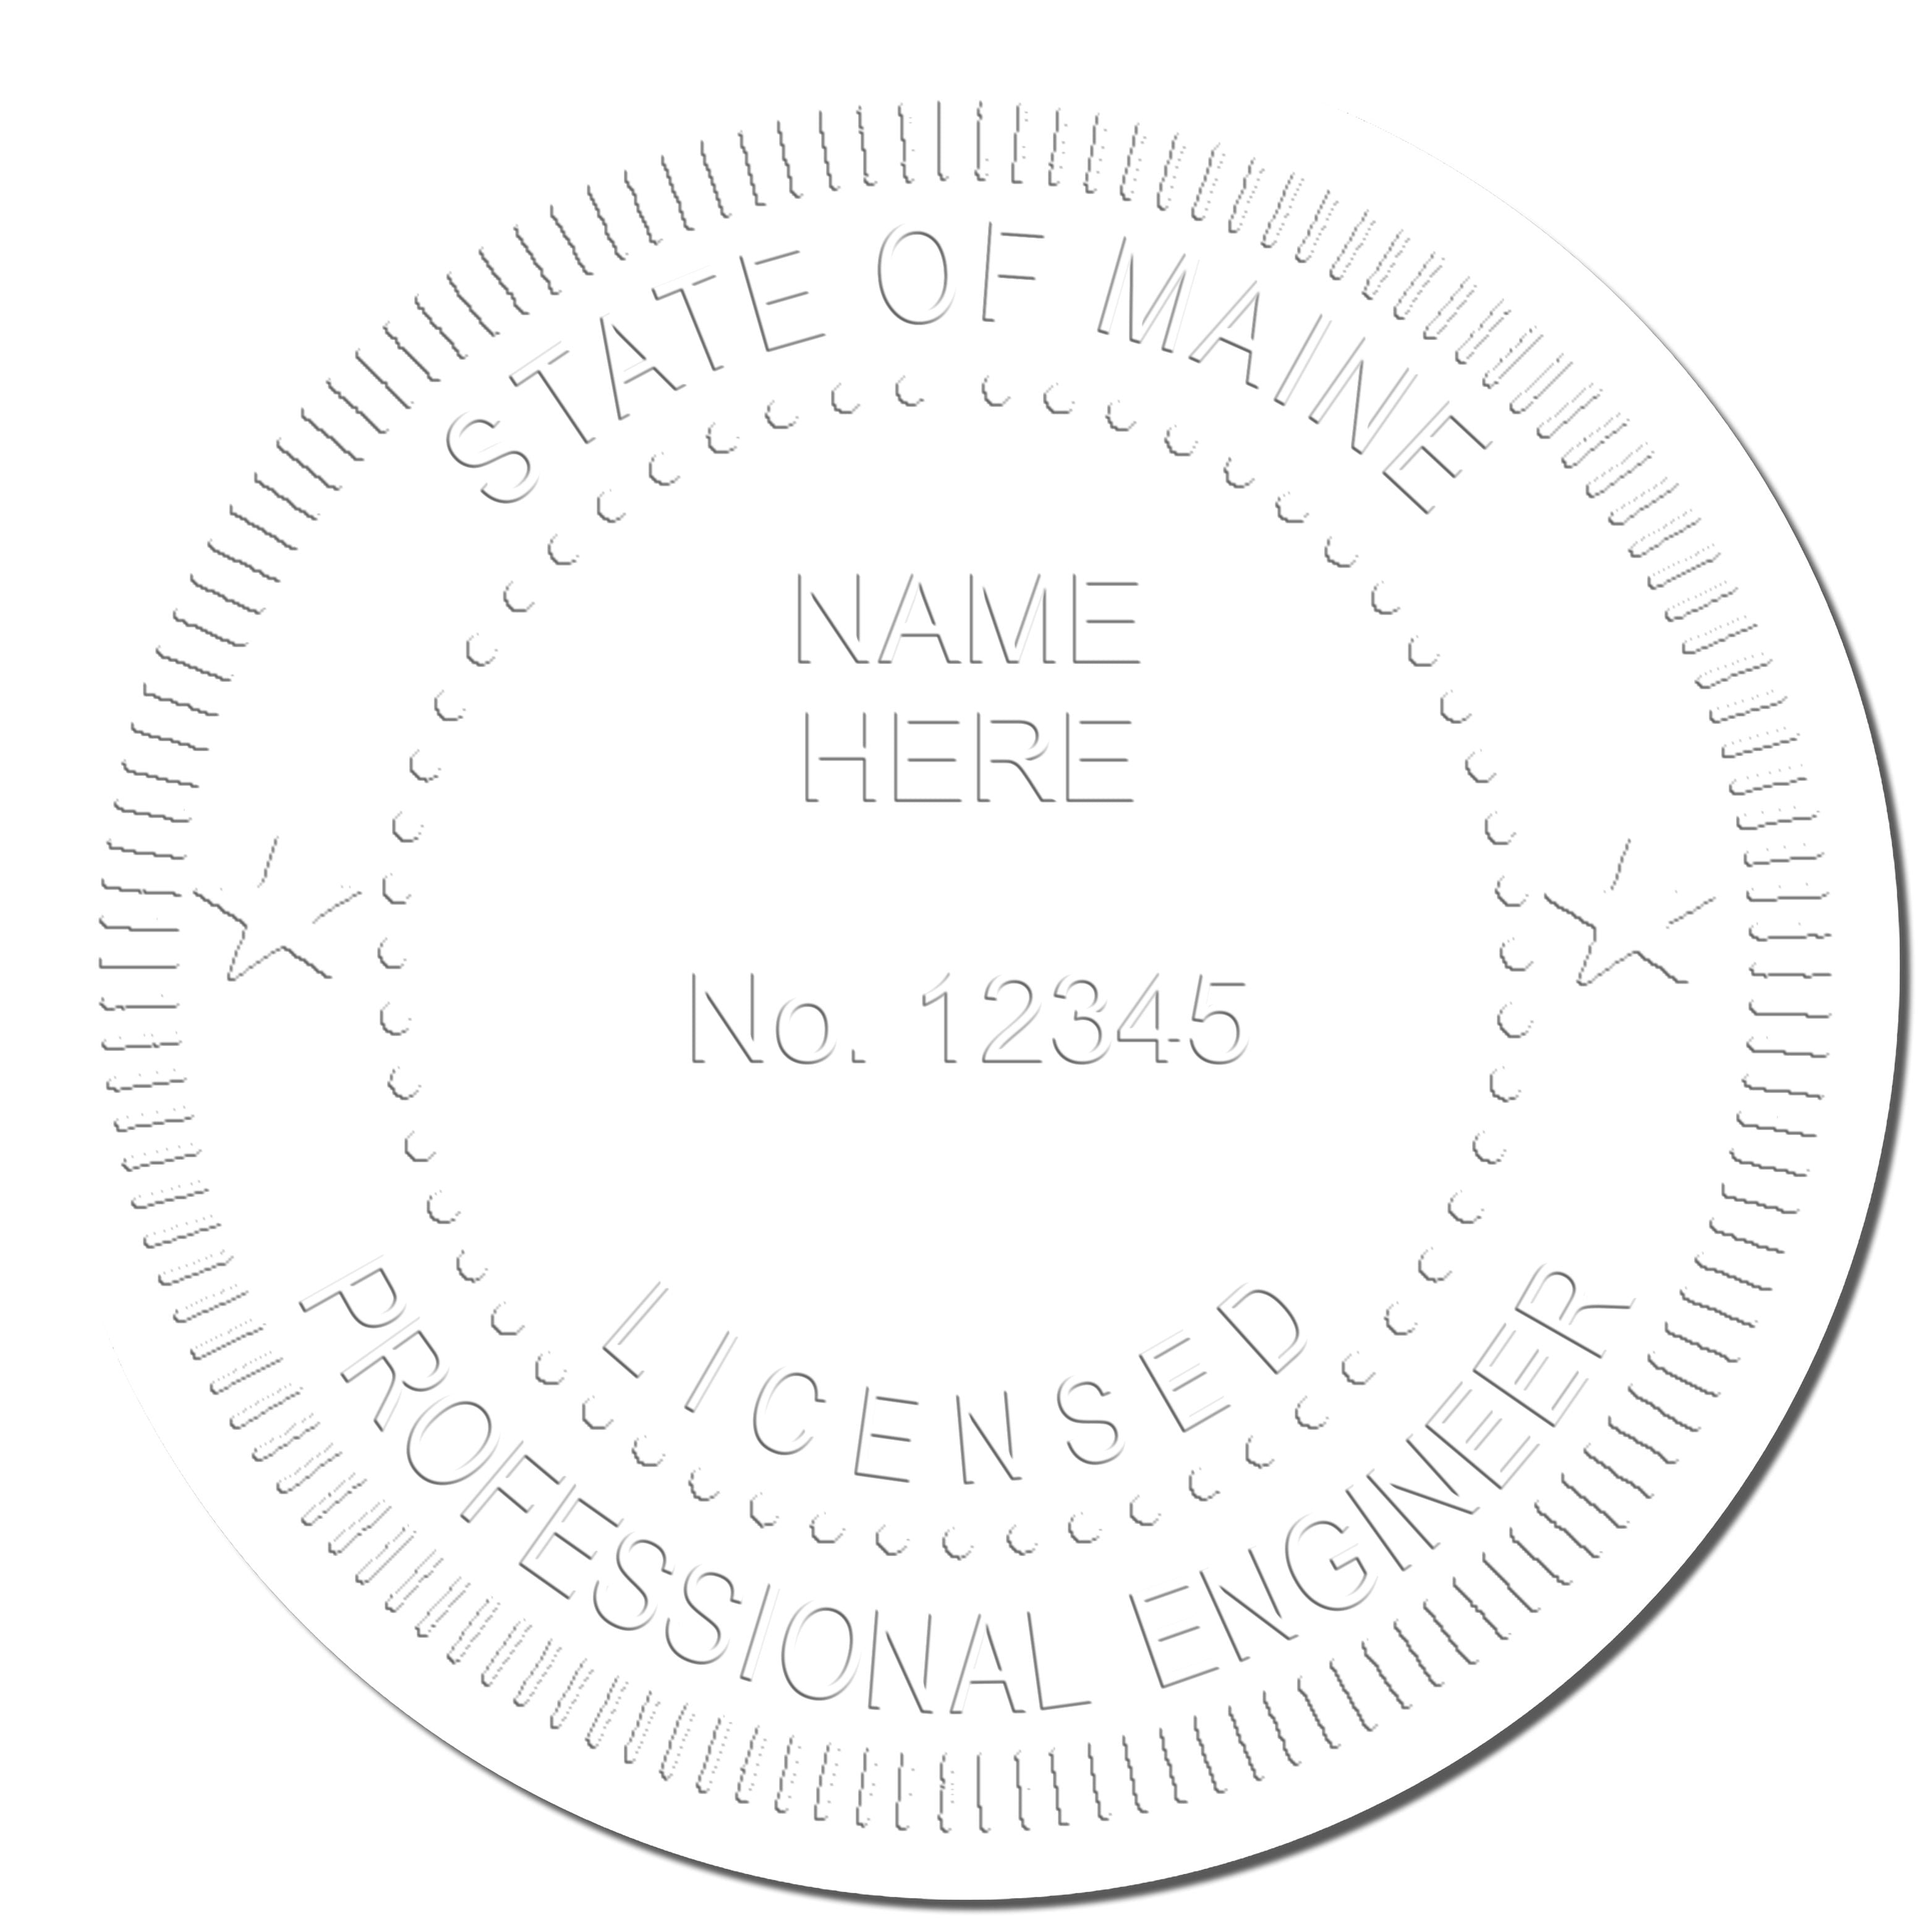 Another Example of a stamped impression of the Maine Engineer Desk Seal on a piece of office paper.